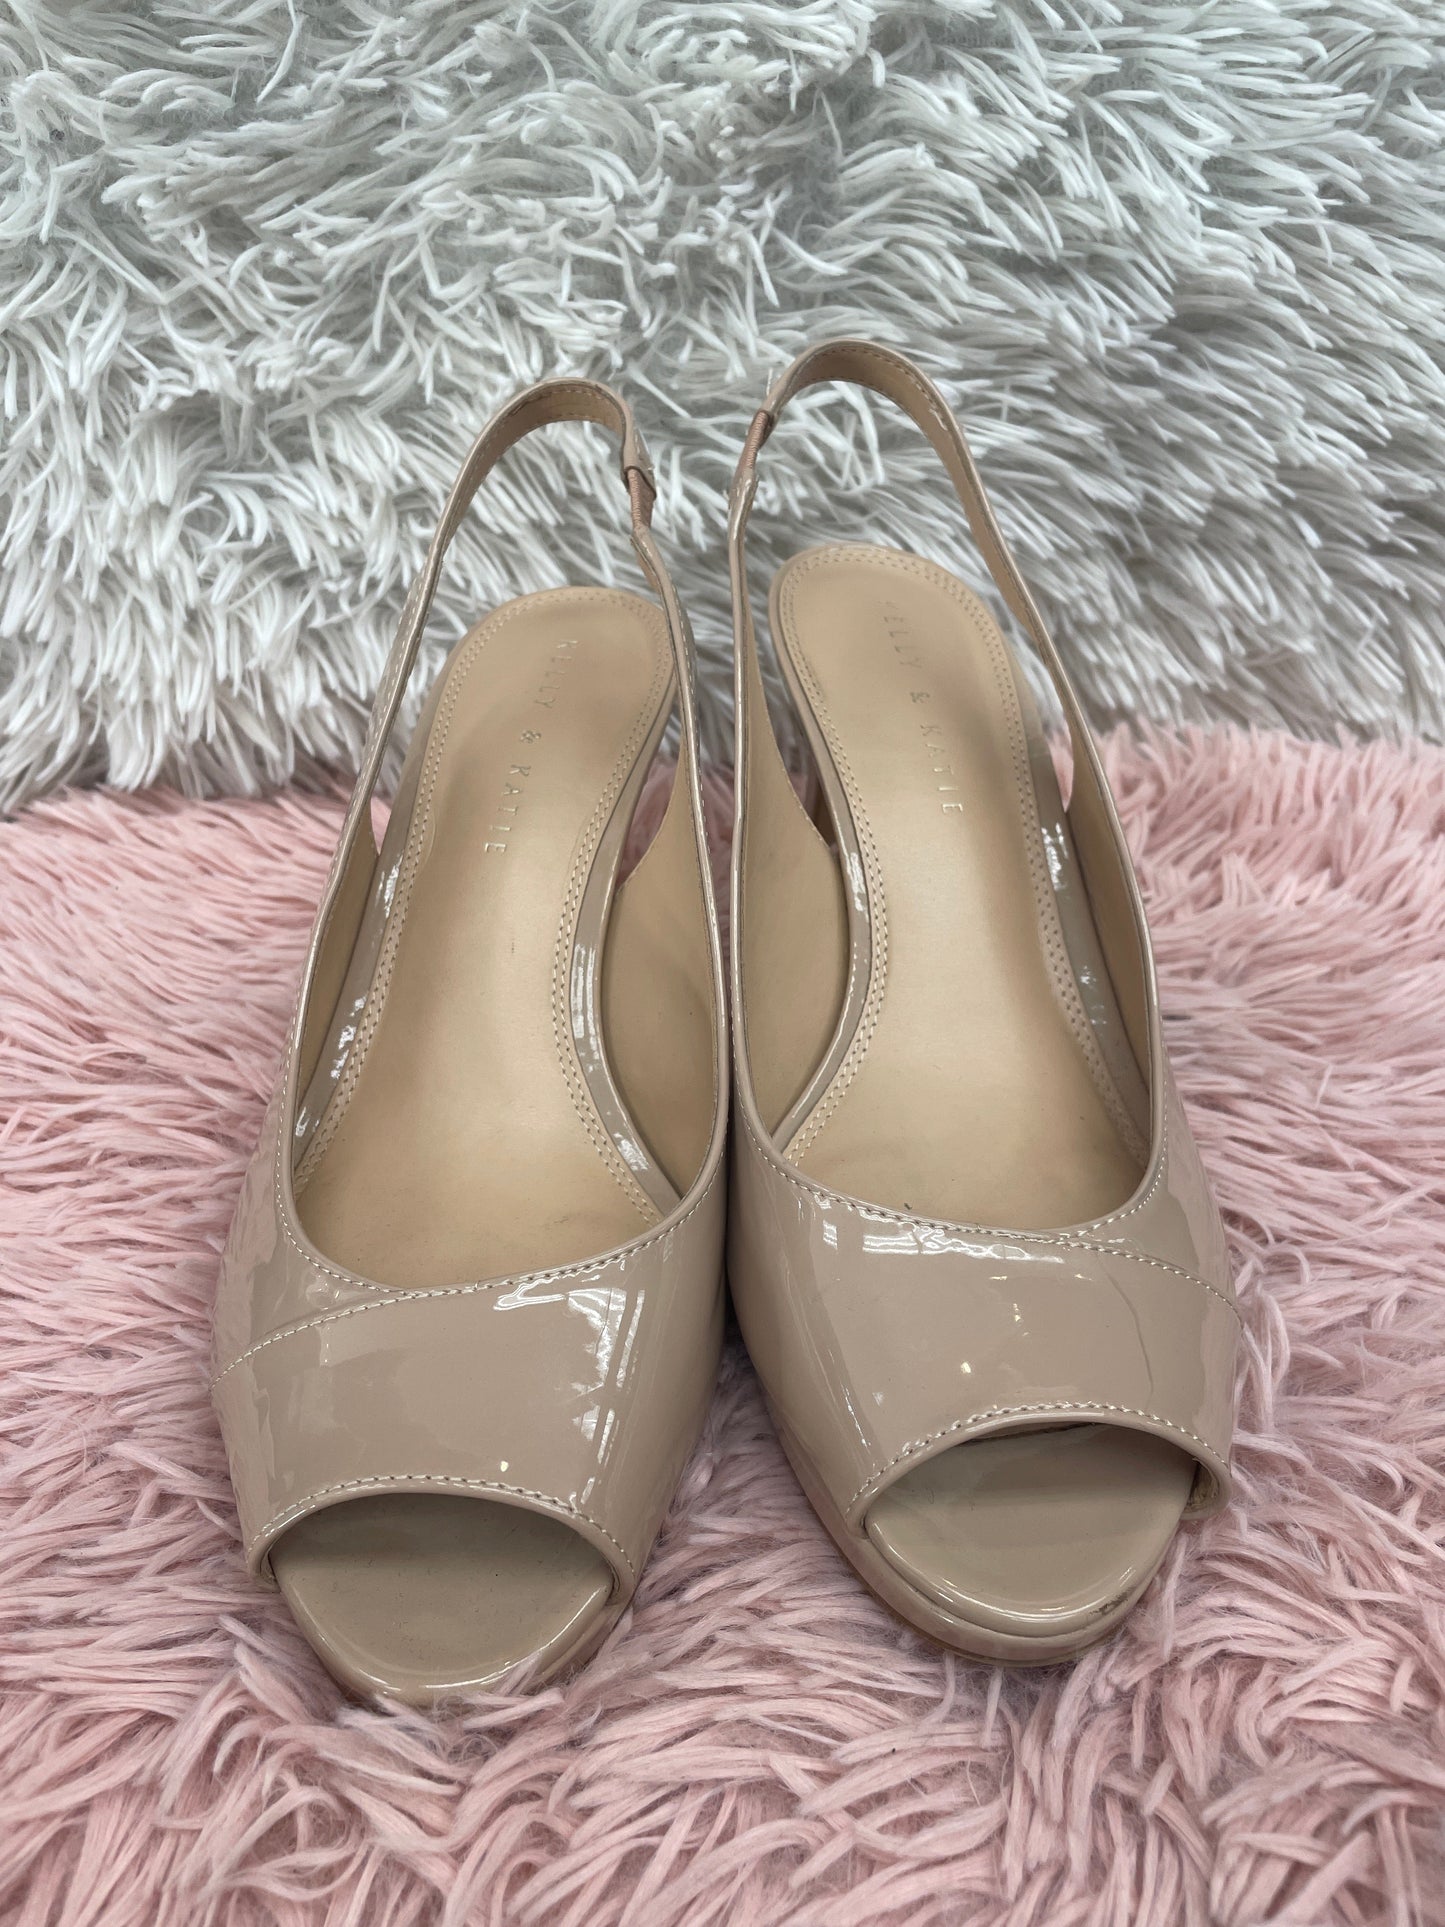 Nude Shoes Heels Stiletto Kelly And Katie, Size 10